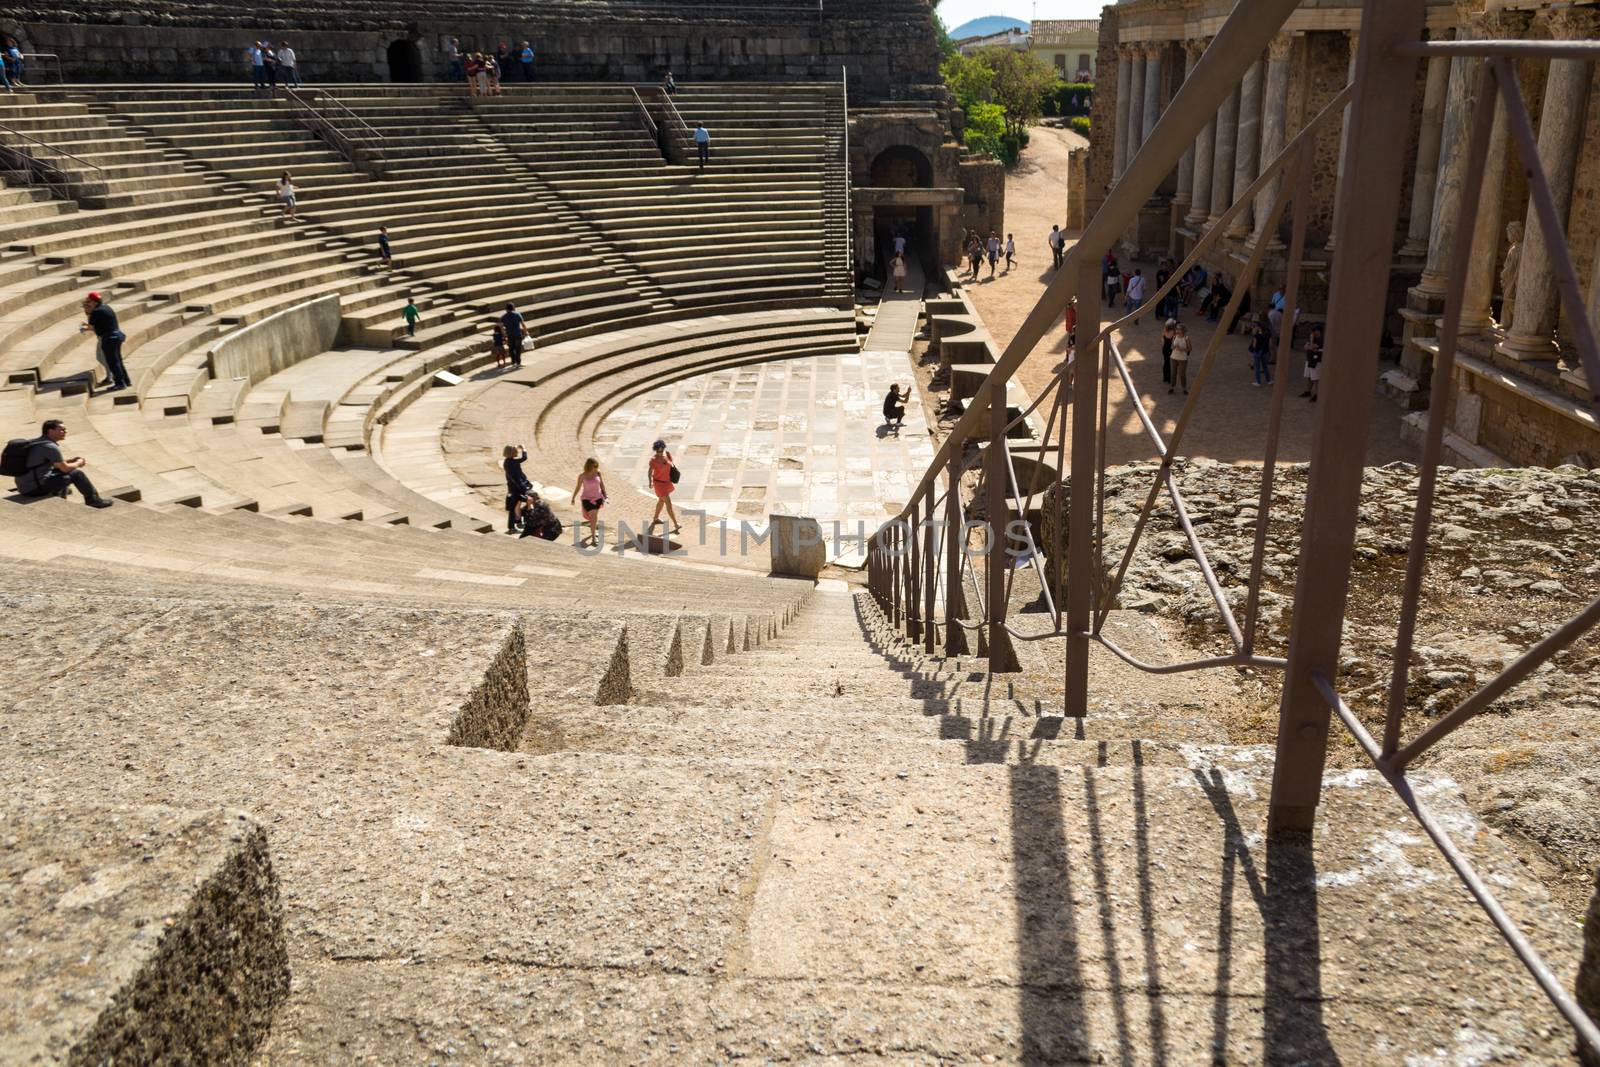 tourists visiting the Roman ruins theatre arena & waiting rooms used for gladiator & animal fights in Merida, Spain by kb79